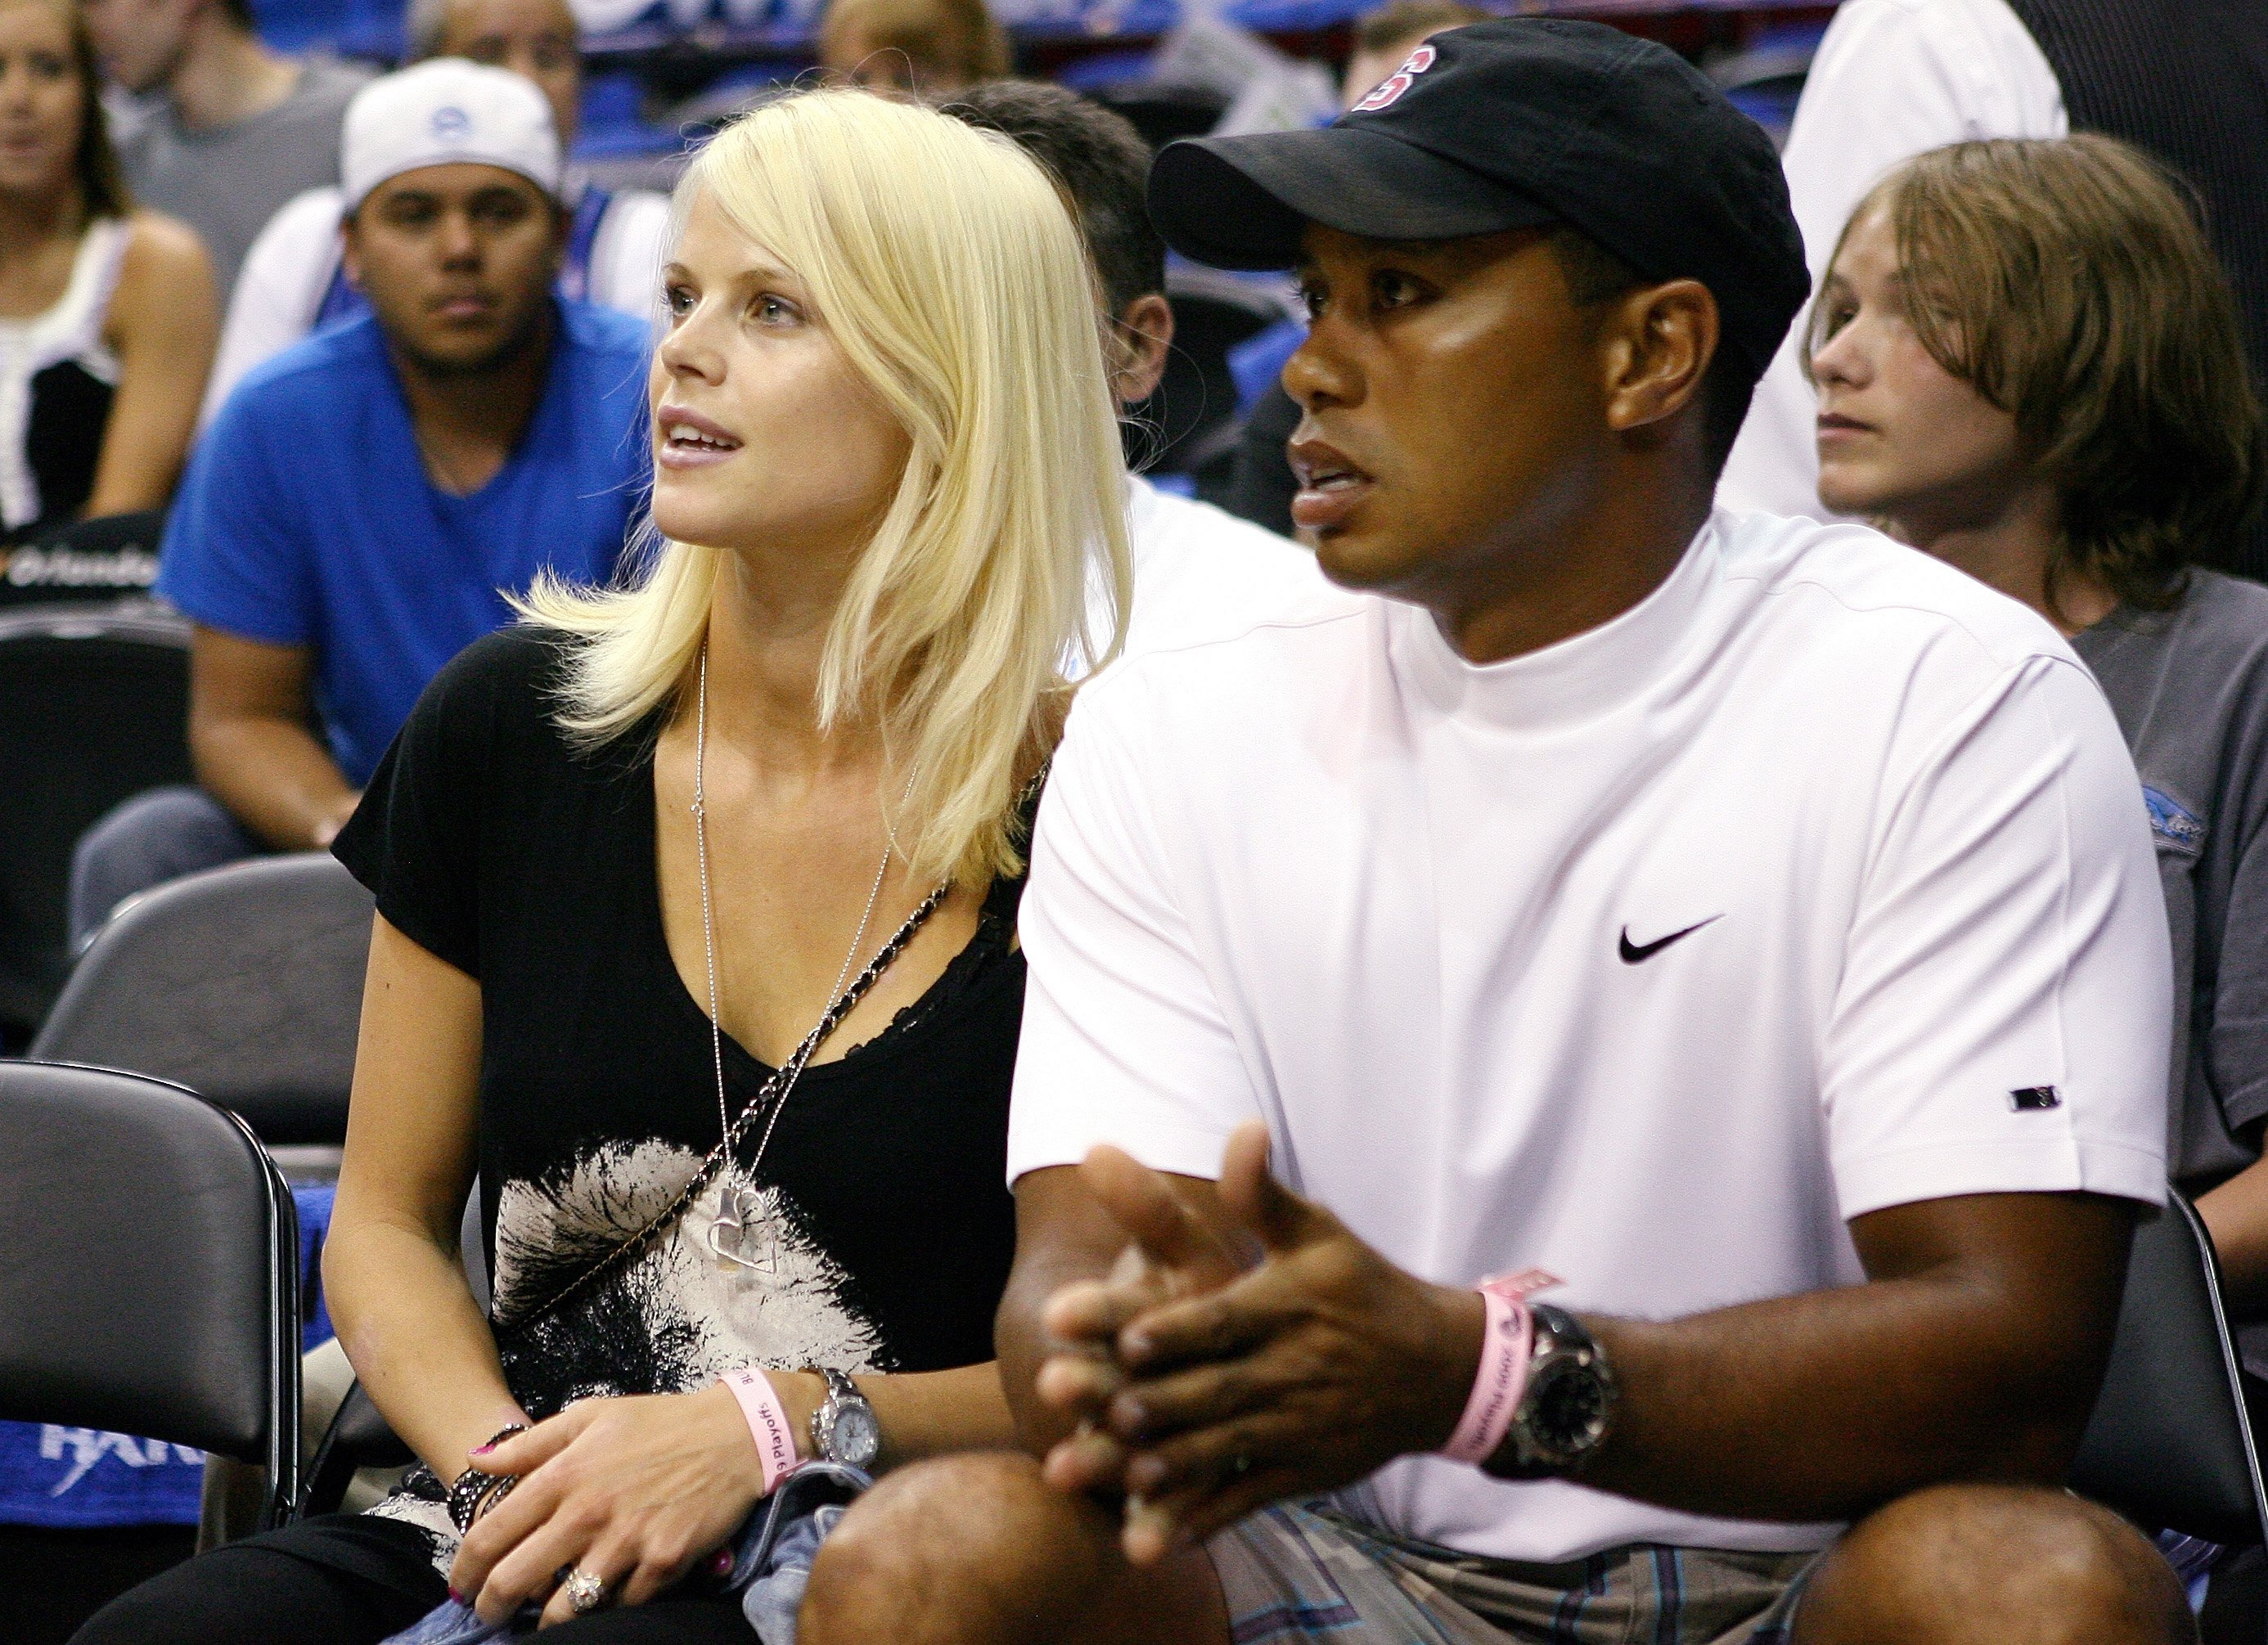 Golfer Tiger Woods with Elin Nordegren on June 11 2009 in Orlando, Florida | Source: Getty Images